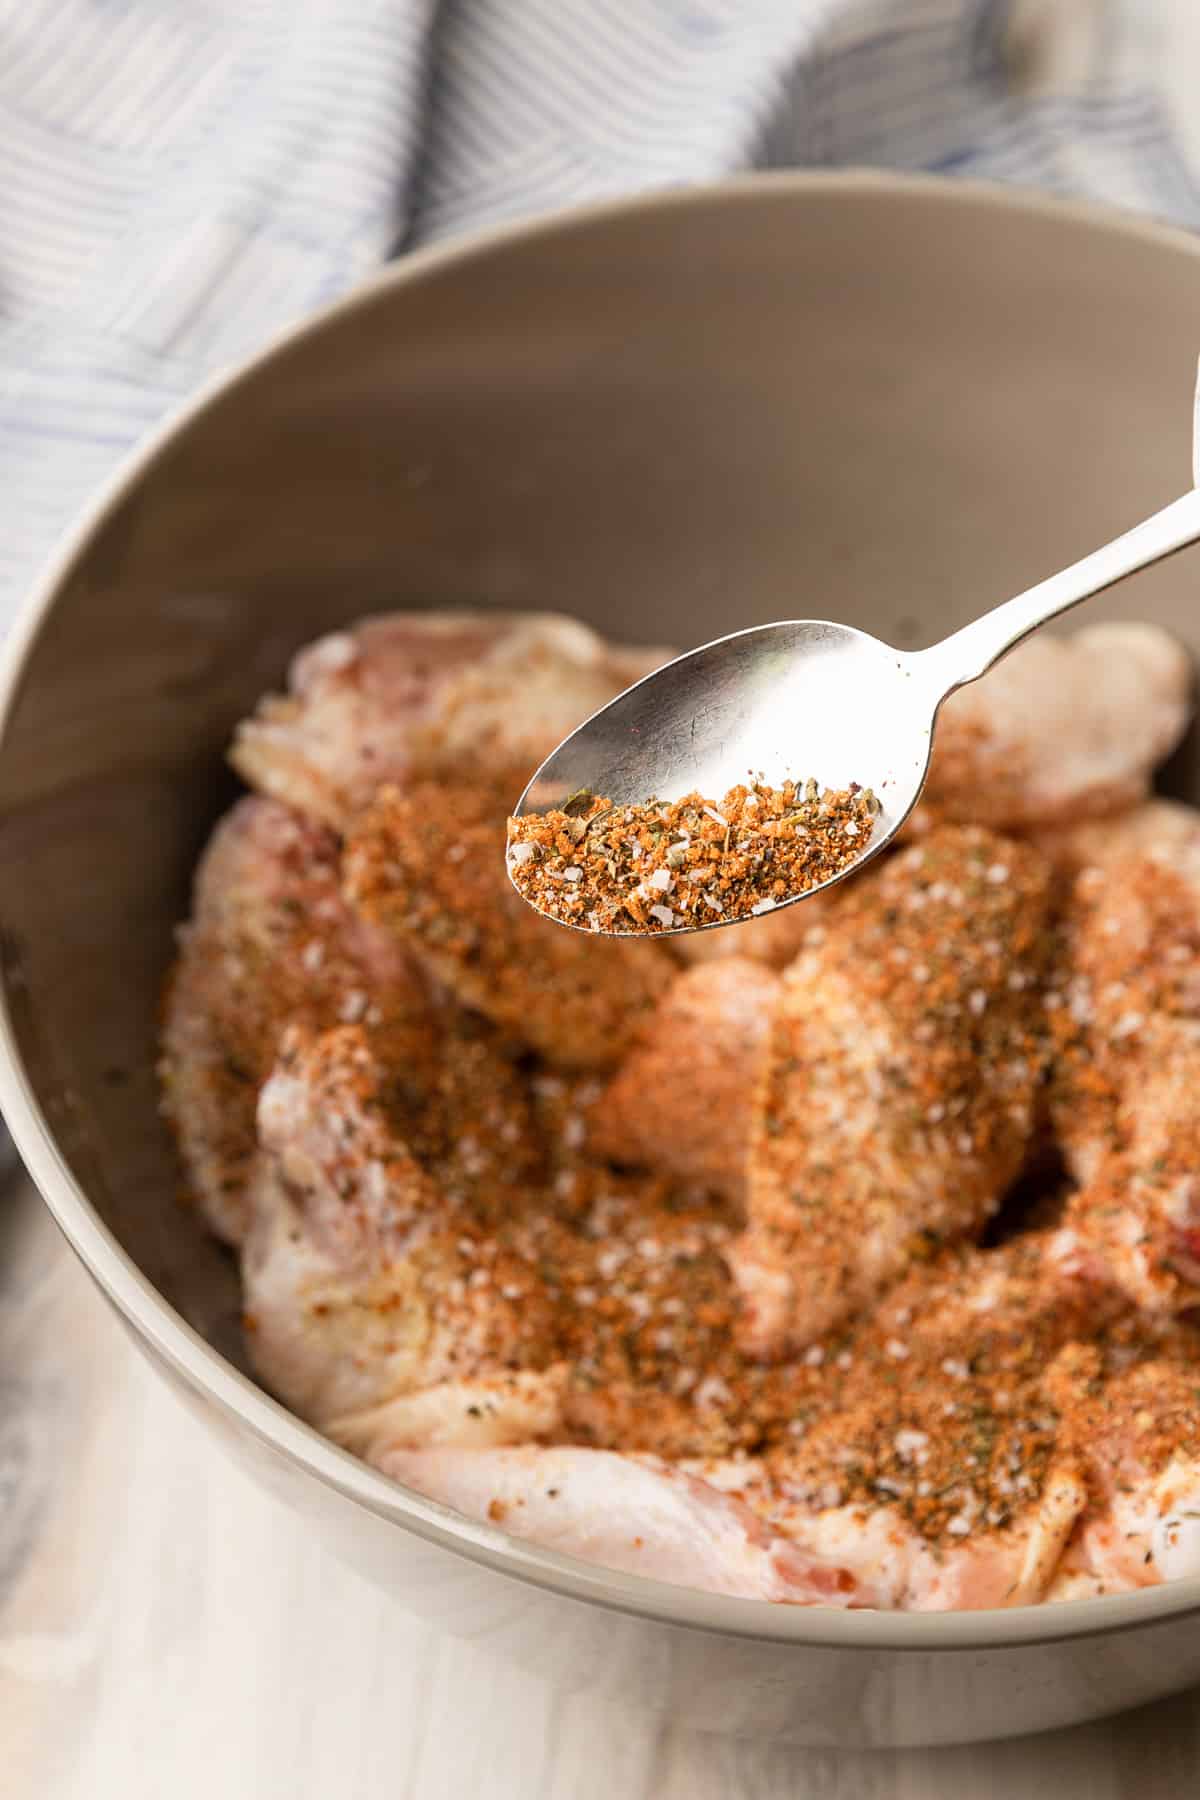 dry rub mixture added to raw wings in a bowl.